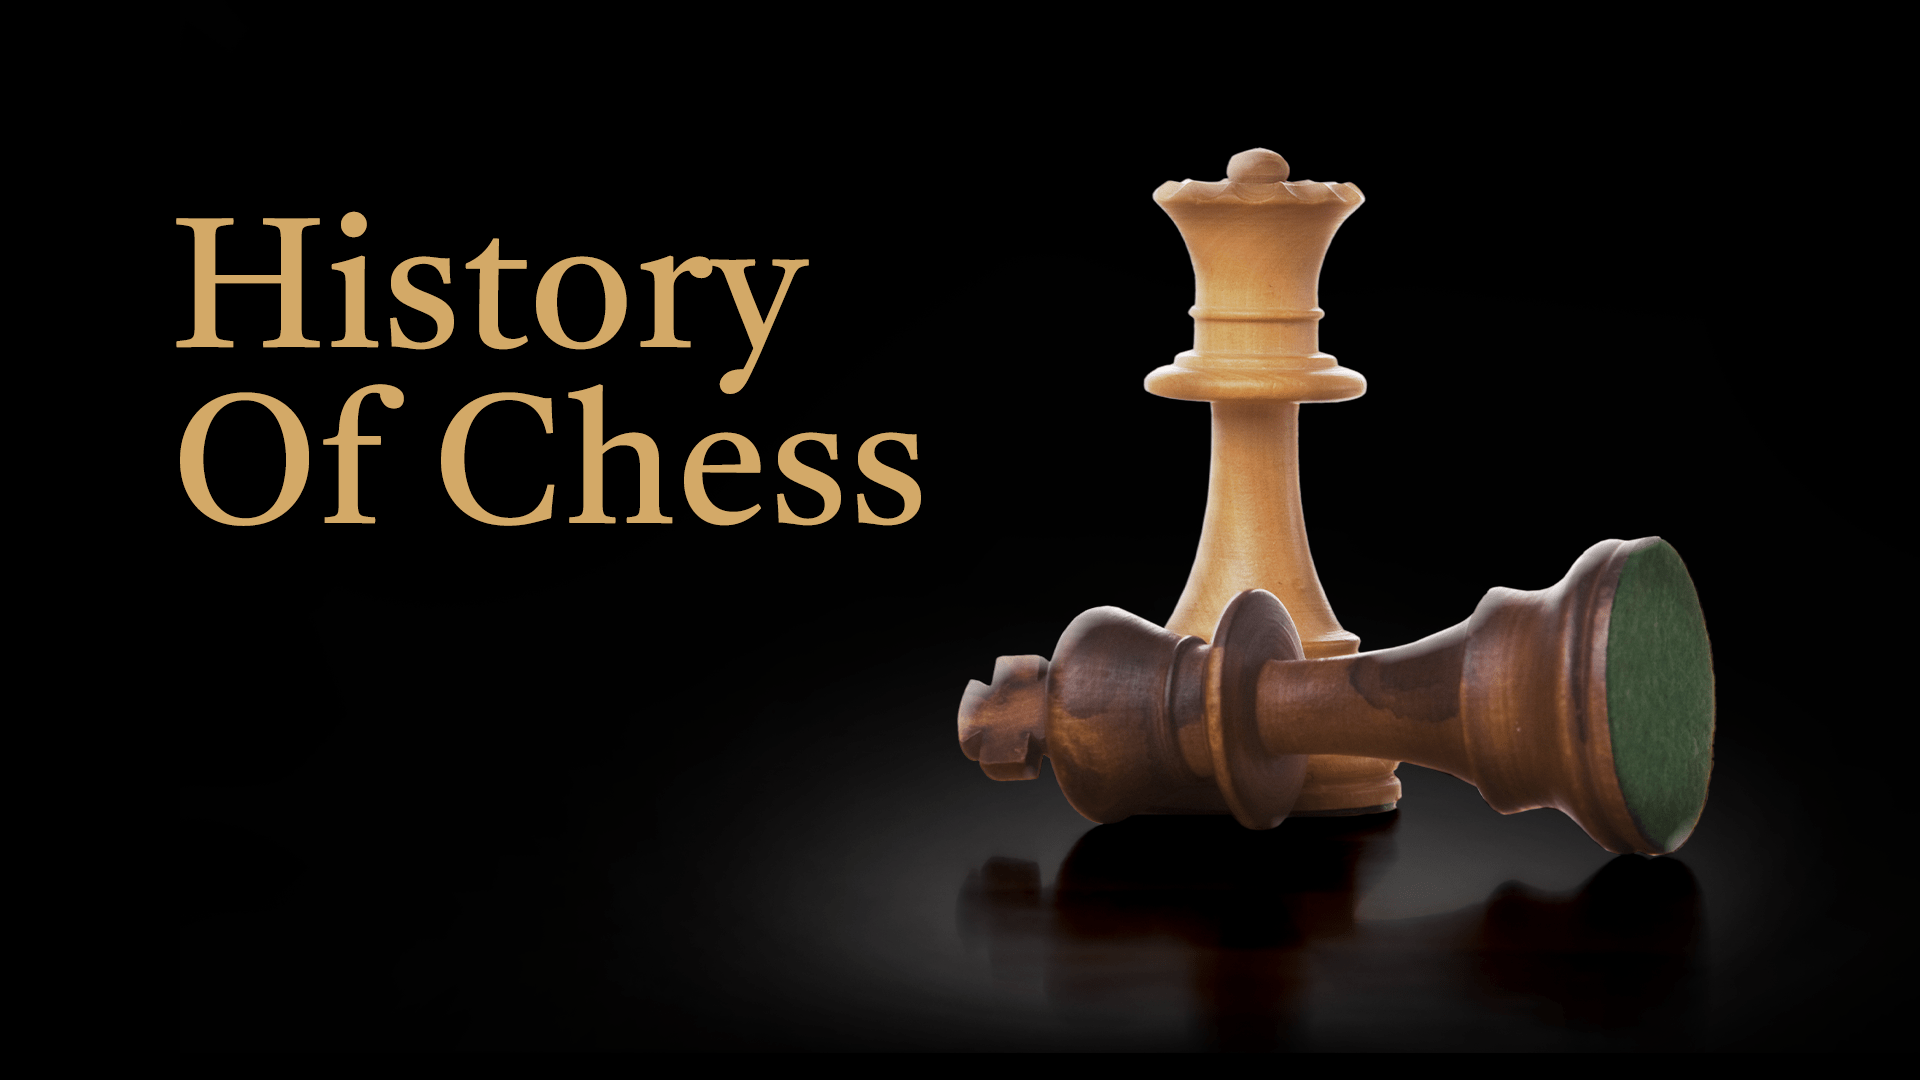 Chess.com Releases Documentary ‘The History Of Chess: A Reflection Of Us’